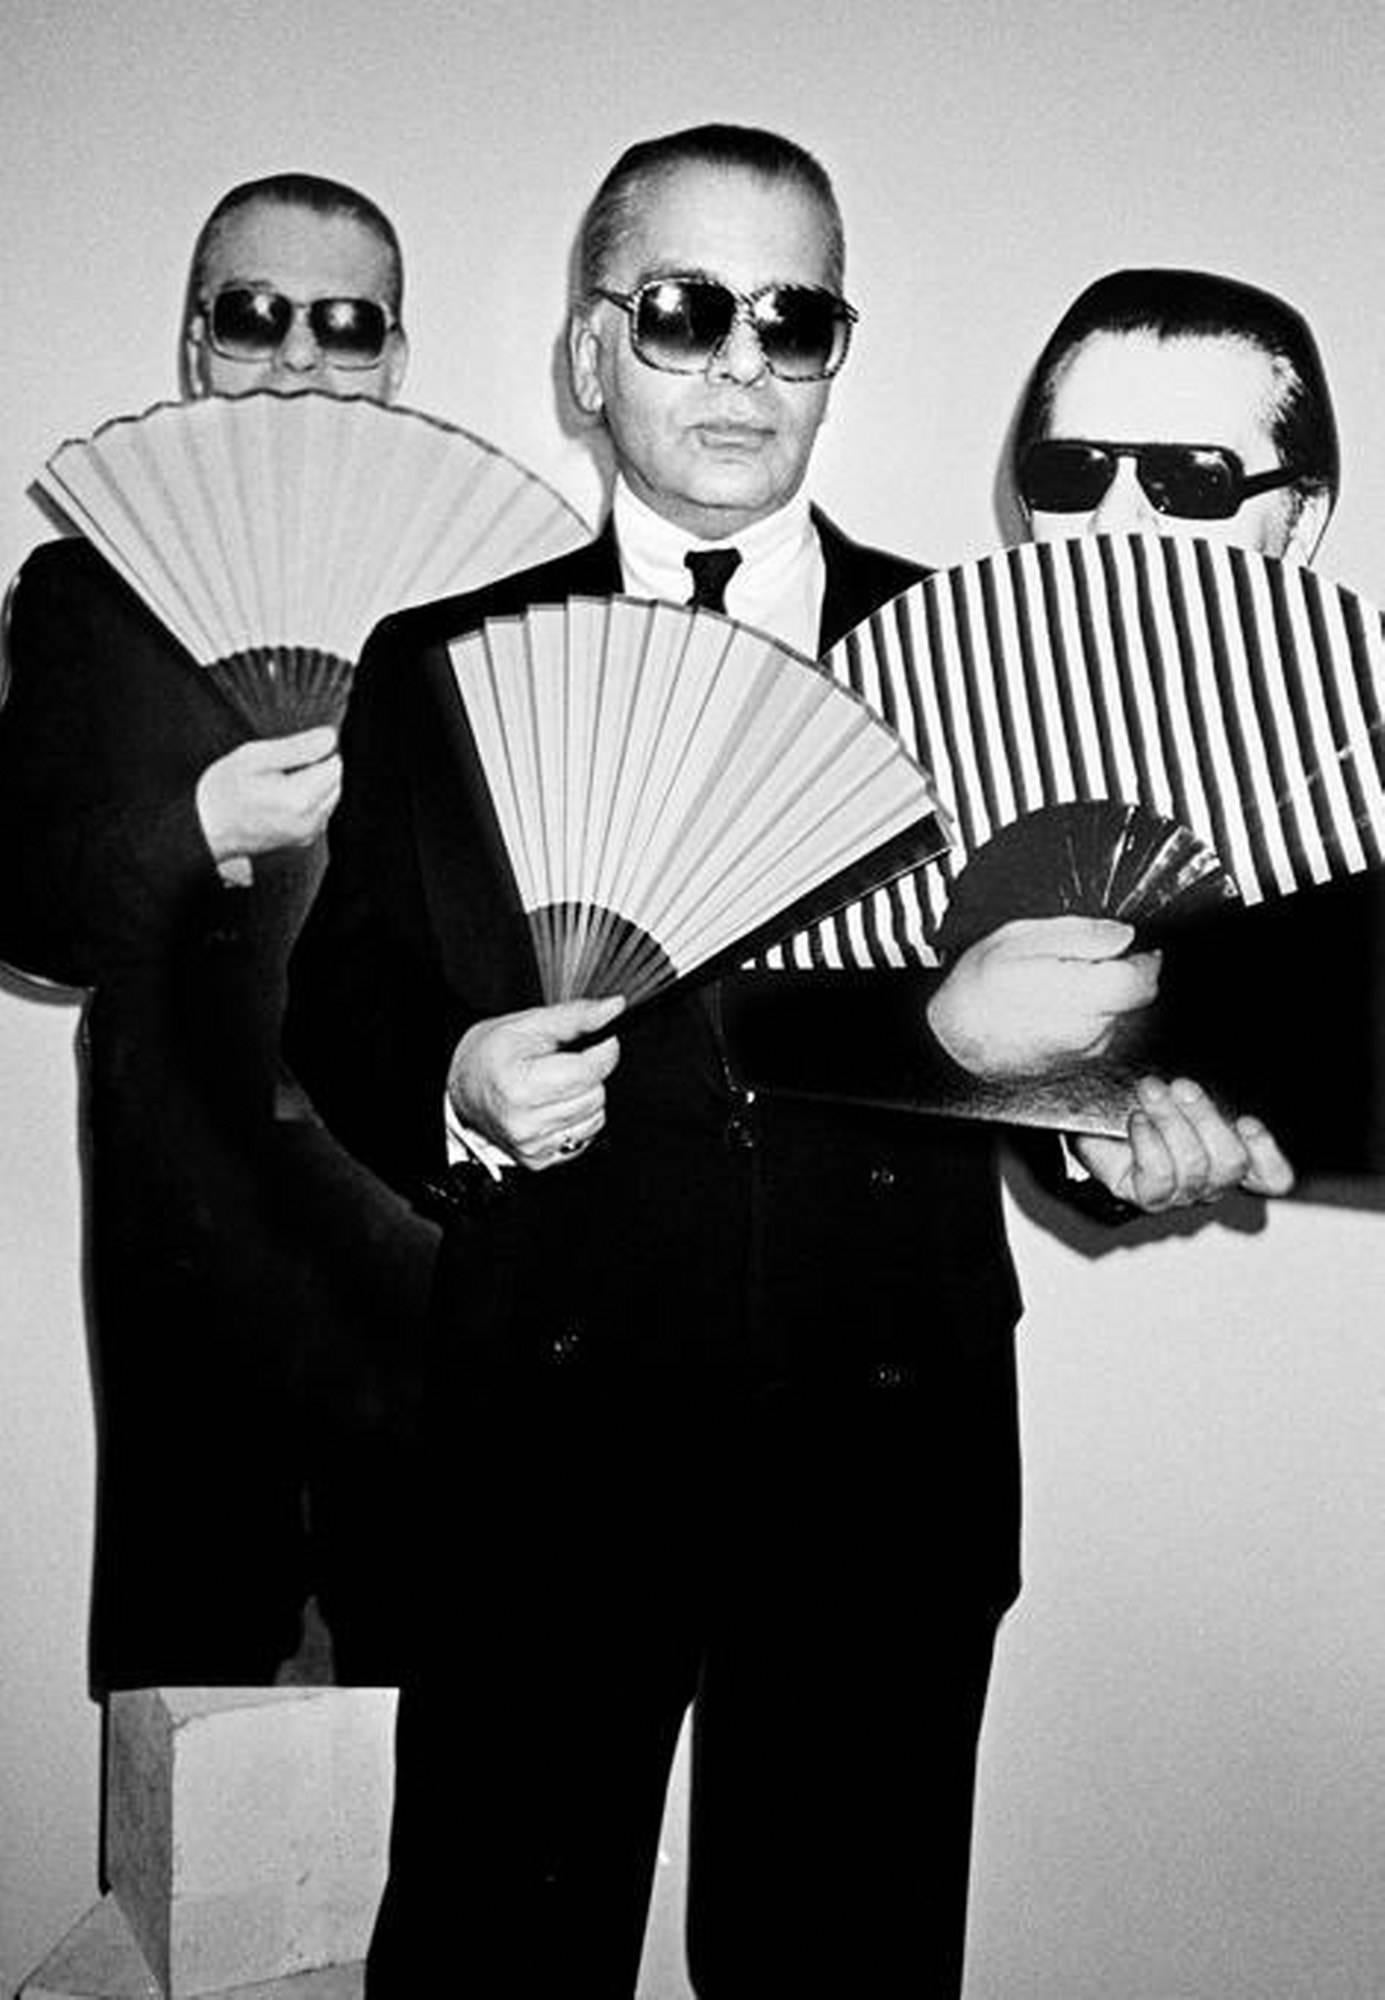 Roxanne Lowit Black and White Photograph - Three Faces of Karl Lagerfeld - b&w portrait of the famous fashion designer